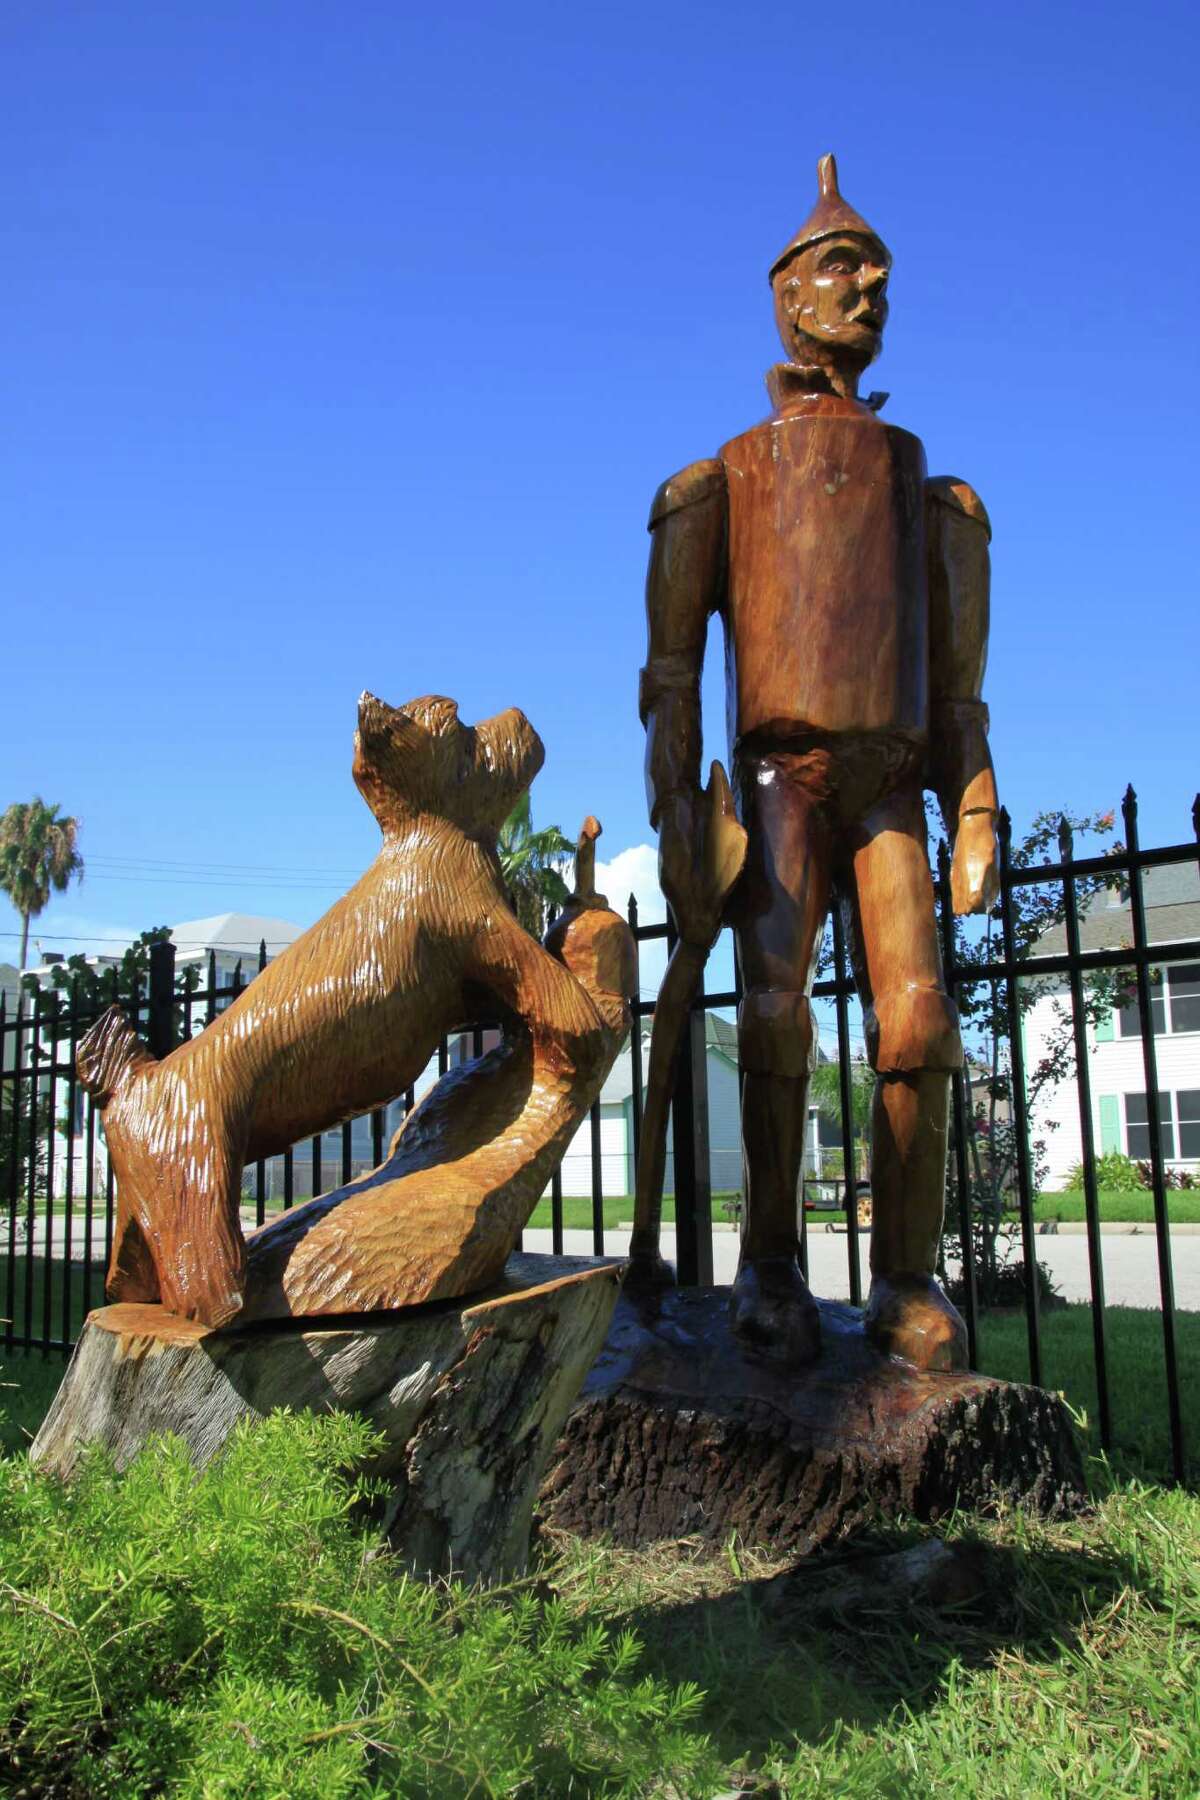 Take the Galveston Tree Sculpture Tour Dozens of tree Sculptures created from trees ruined by Hurricane Ike can be seen through some of Galveston's historic neighborhoods.  Download a brochure to take the tour yourself here.